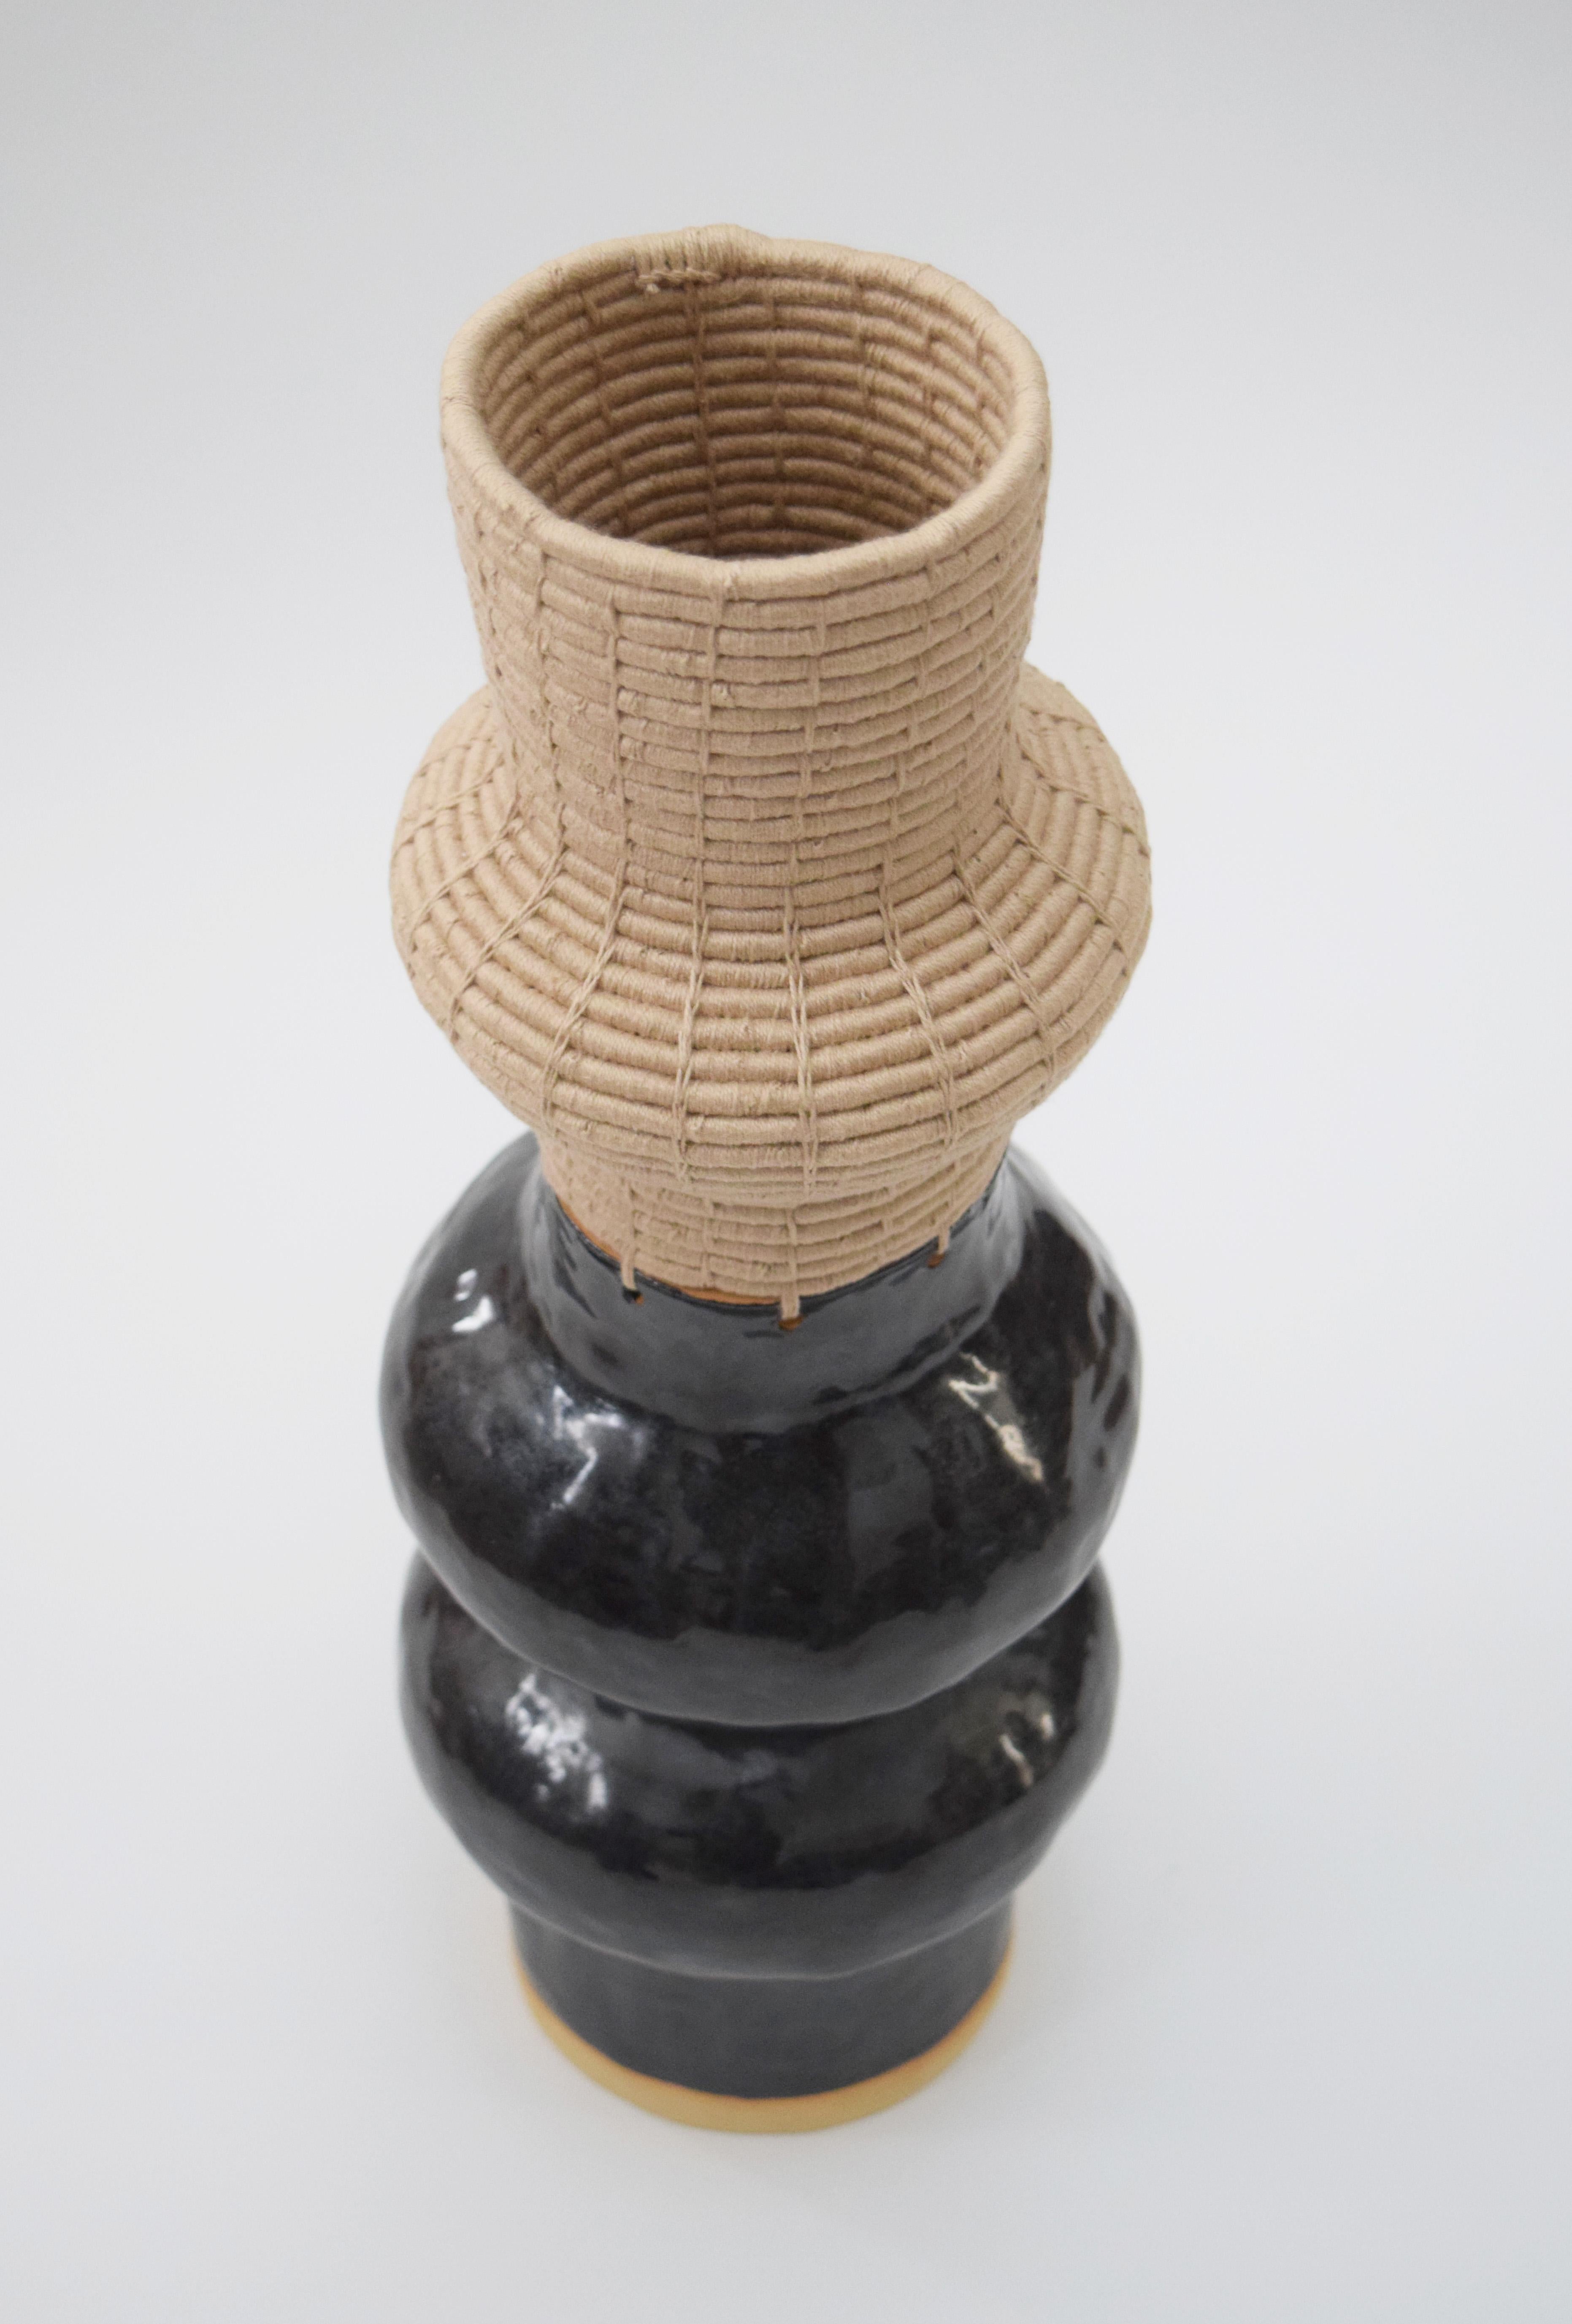 Hand-Crafted One of a Kind Ceramic and Woven Cotton Vessel in Black or Tan